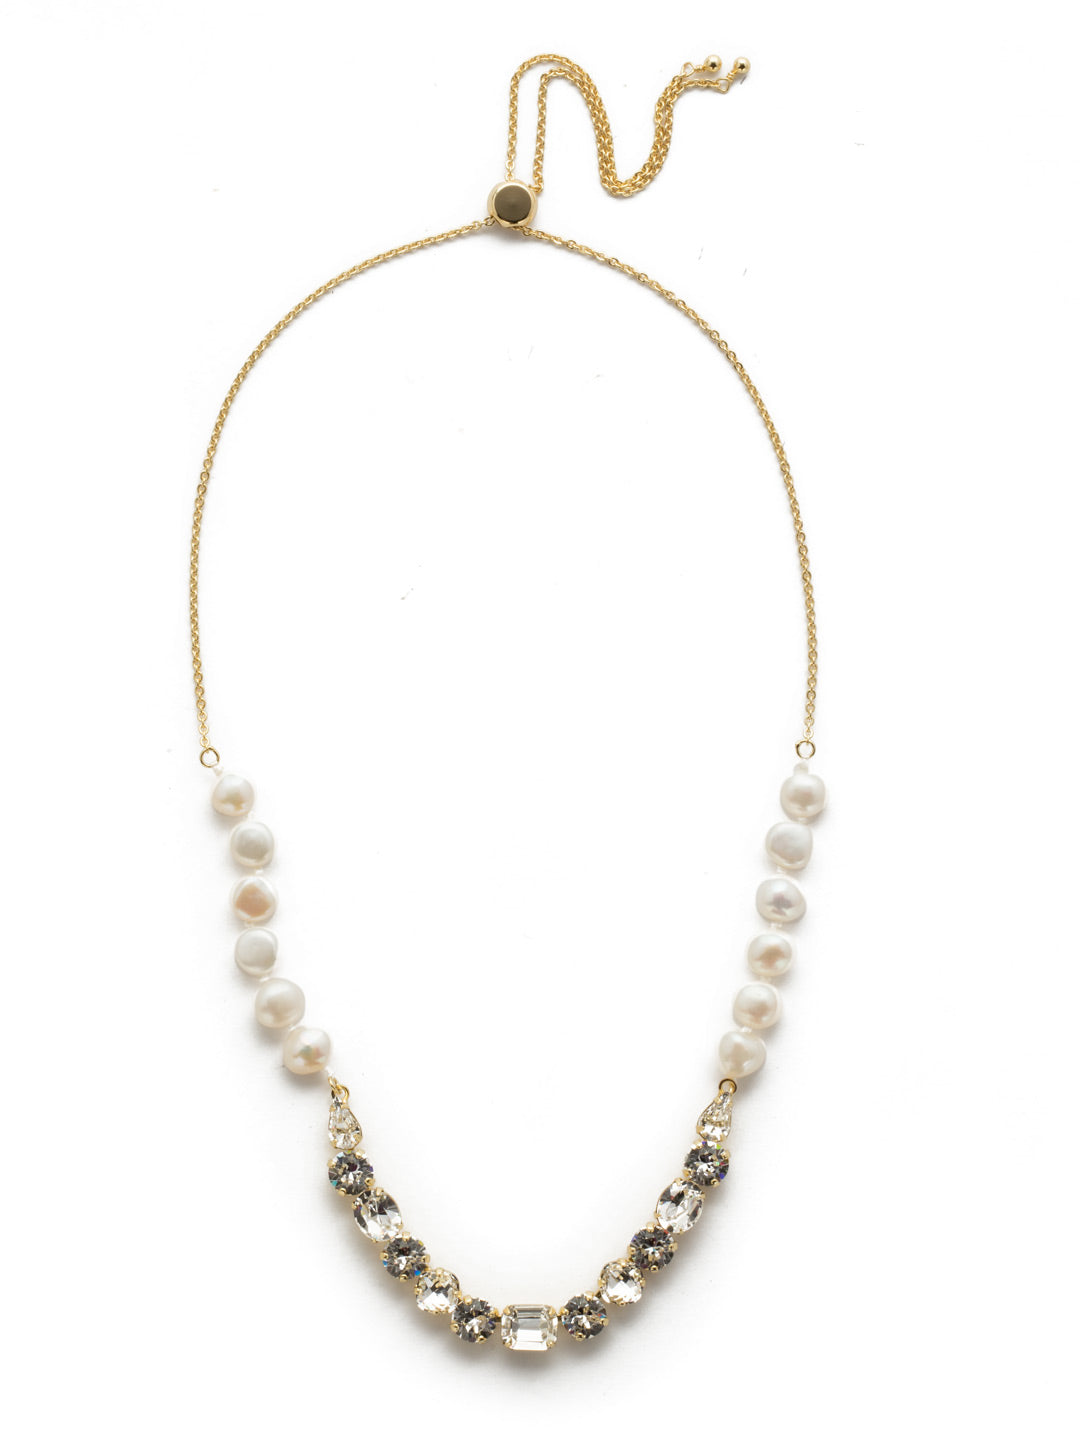 Verona Tennis Necklace - NEH26BGMDP - <p>This classic beauty features wire-wrapped pearls supporting a delicate pattern of crystal shapes at its base with a slider clasp for easy wear. From Sorrelli's Modern Pearl collection in our Bright Gold-tone finish.</p>